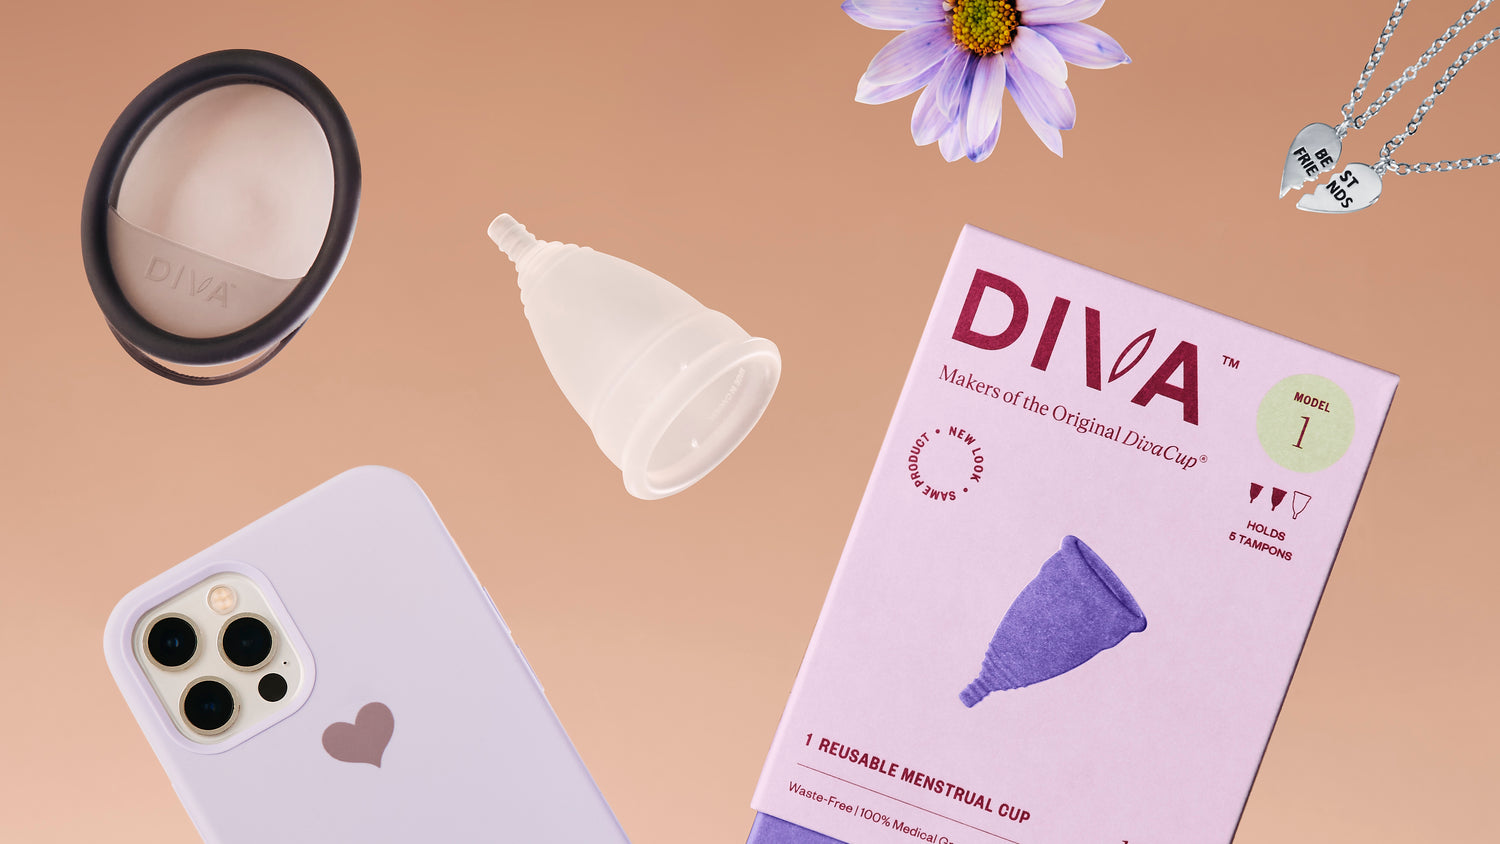 Menstrual cups not an option? Check out these biodegradable pads